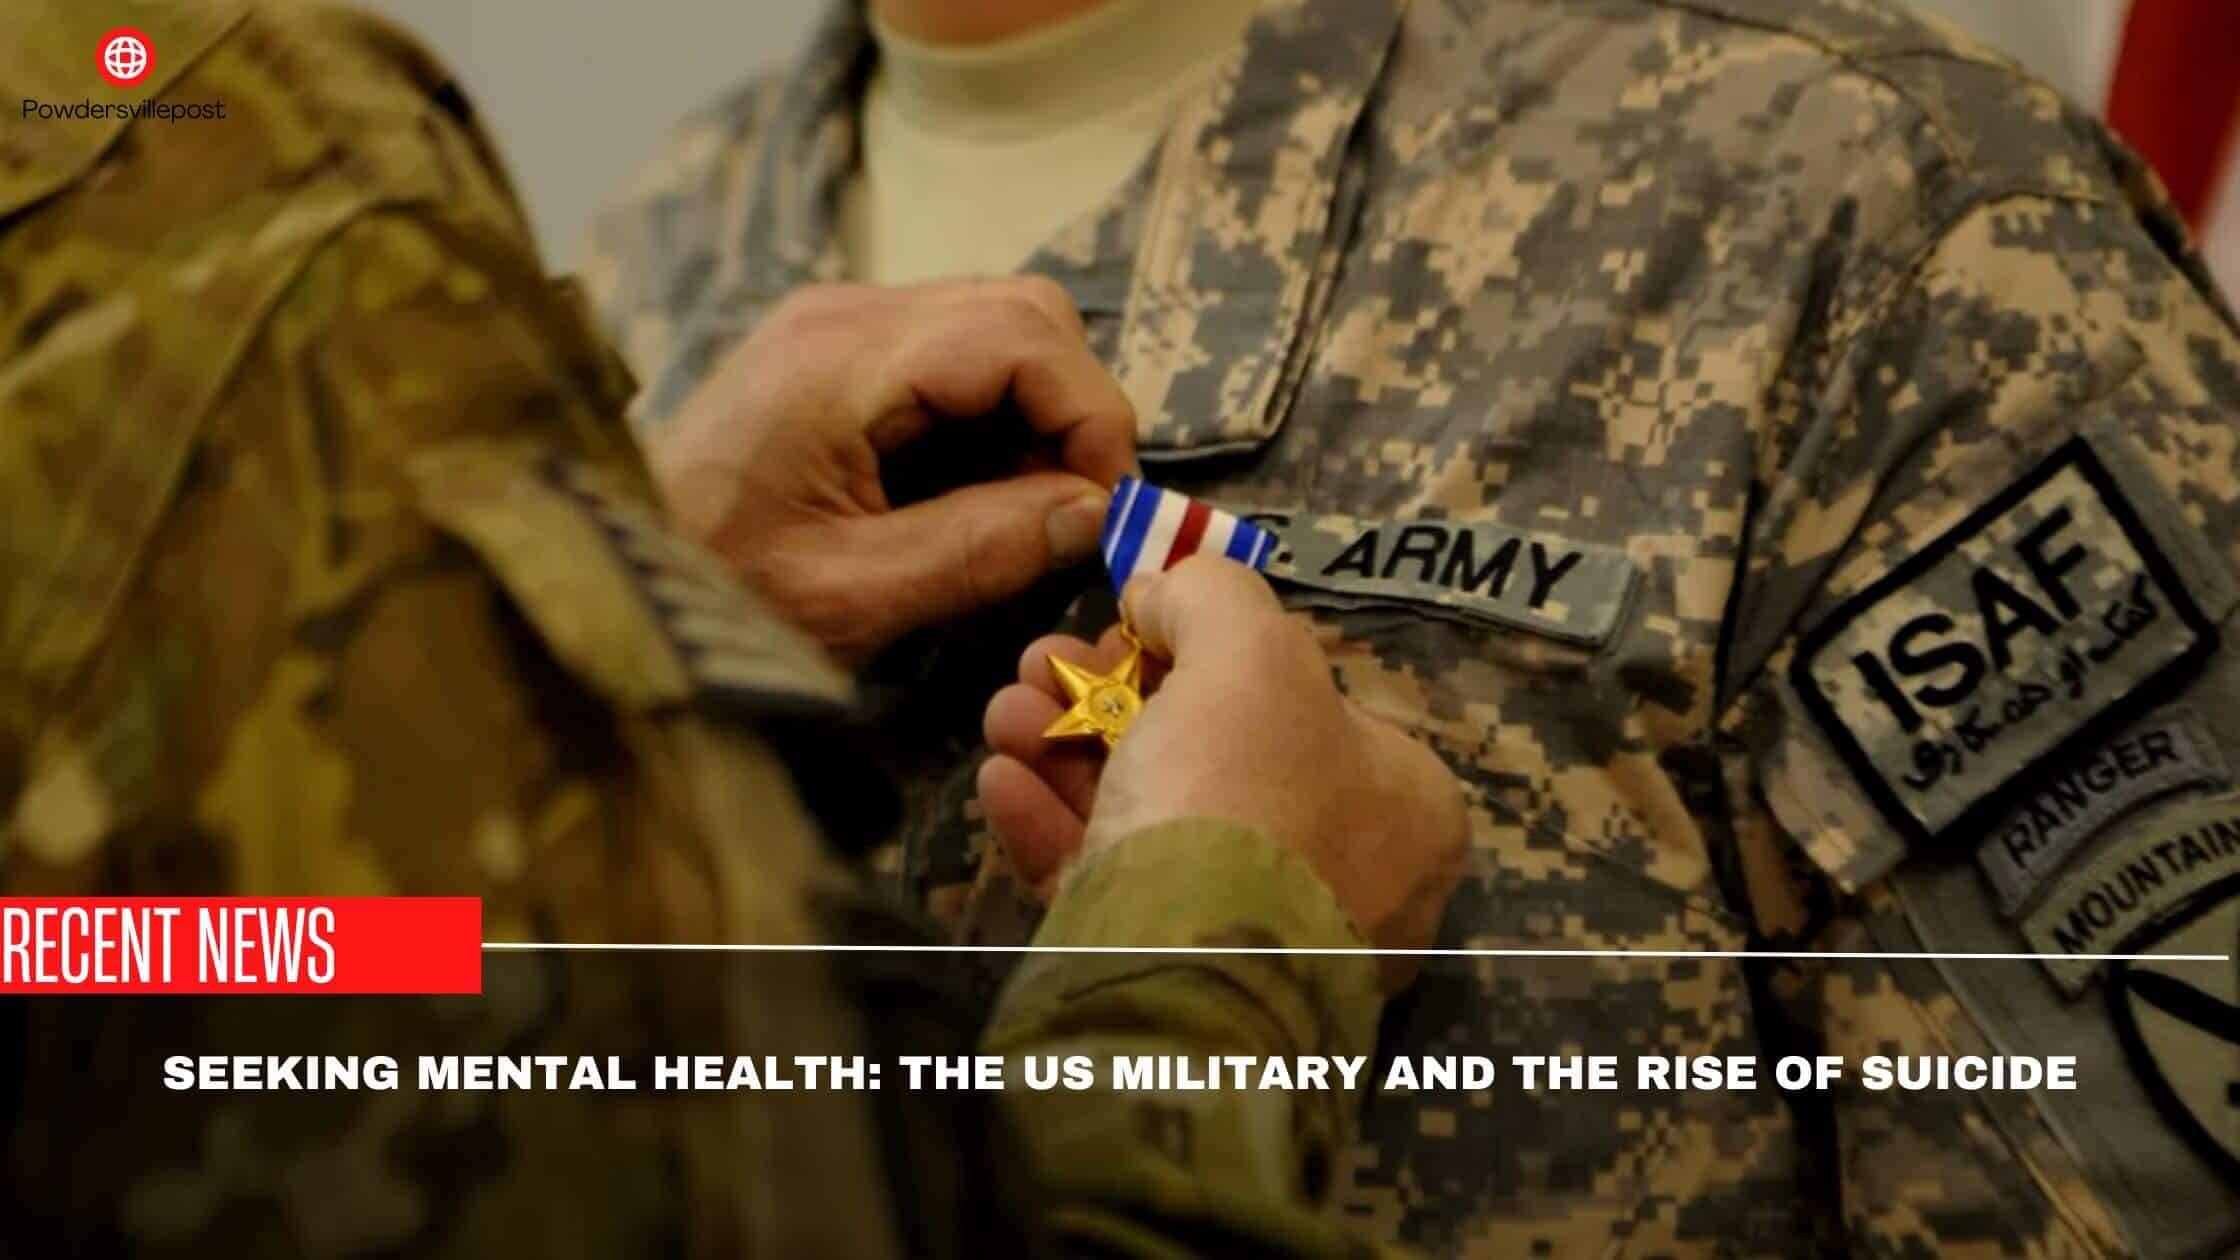 Seeking Mental Health The US Military And The Rise Of Suicide